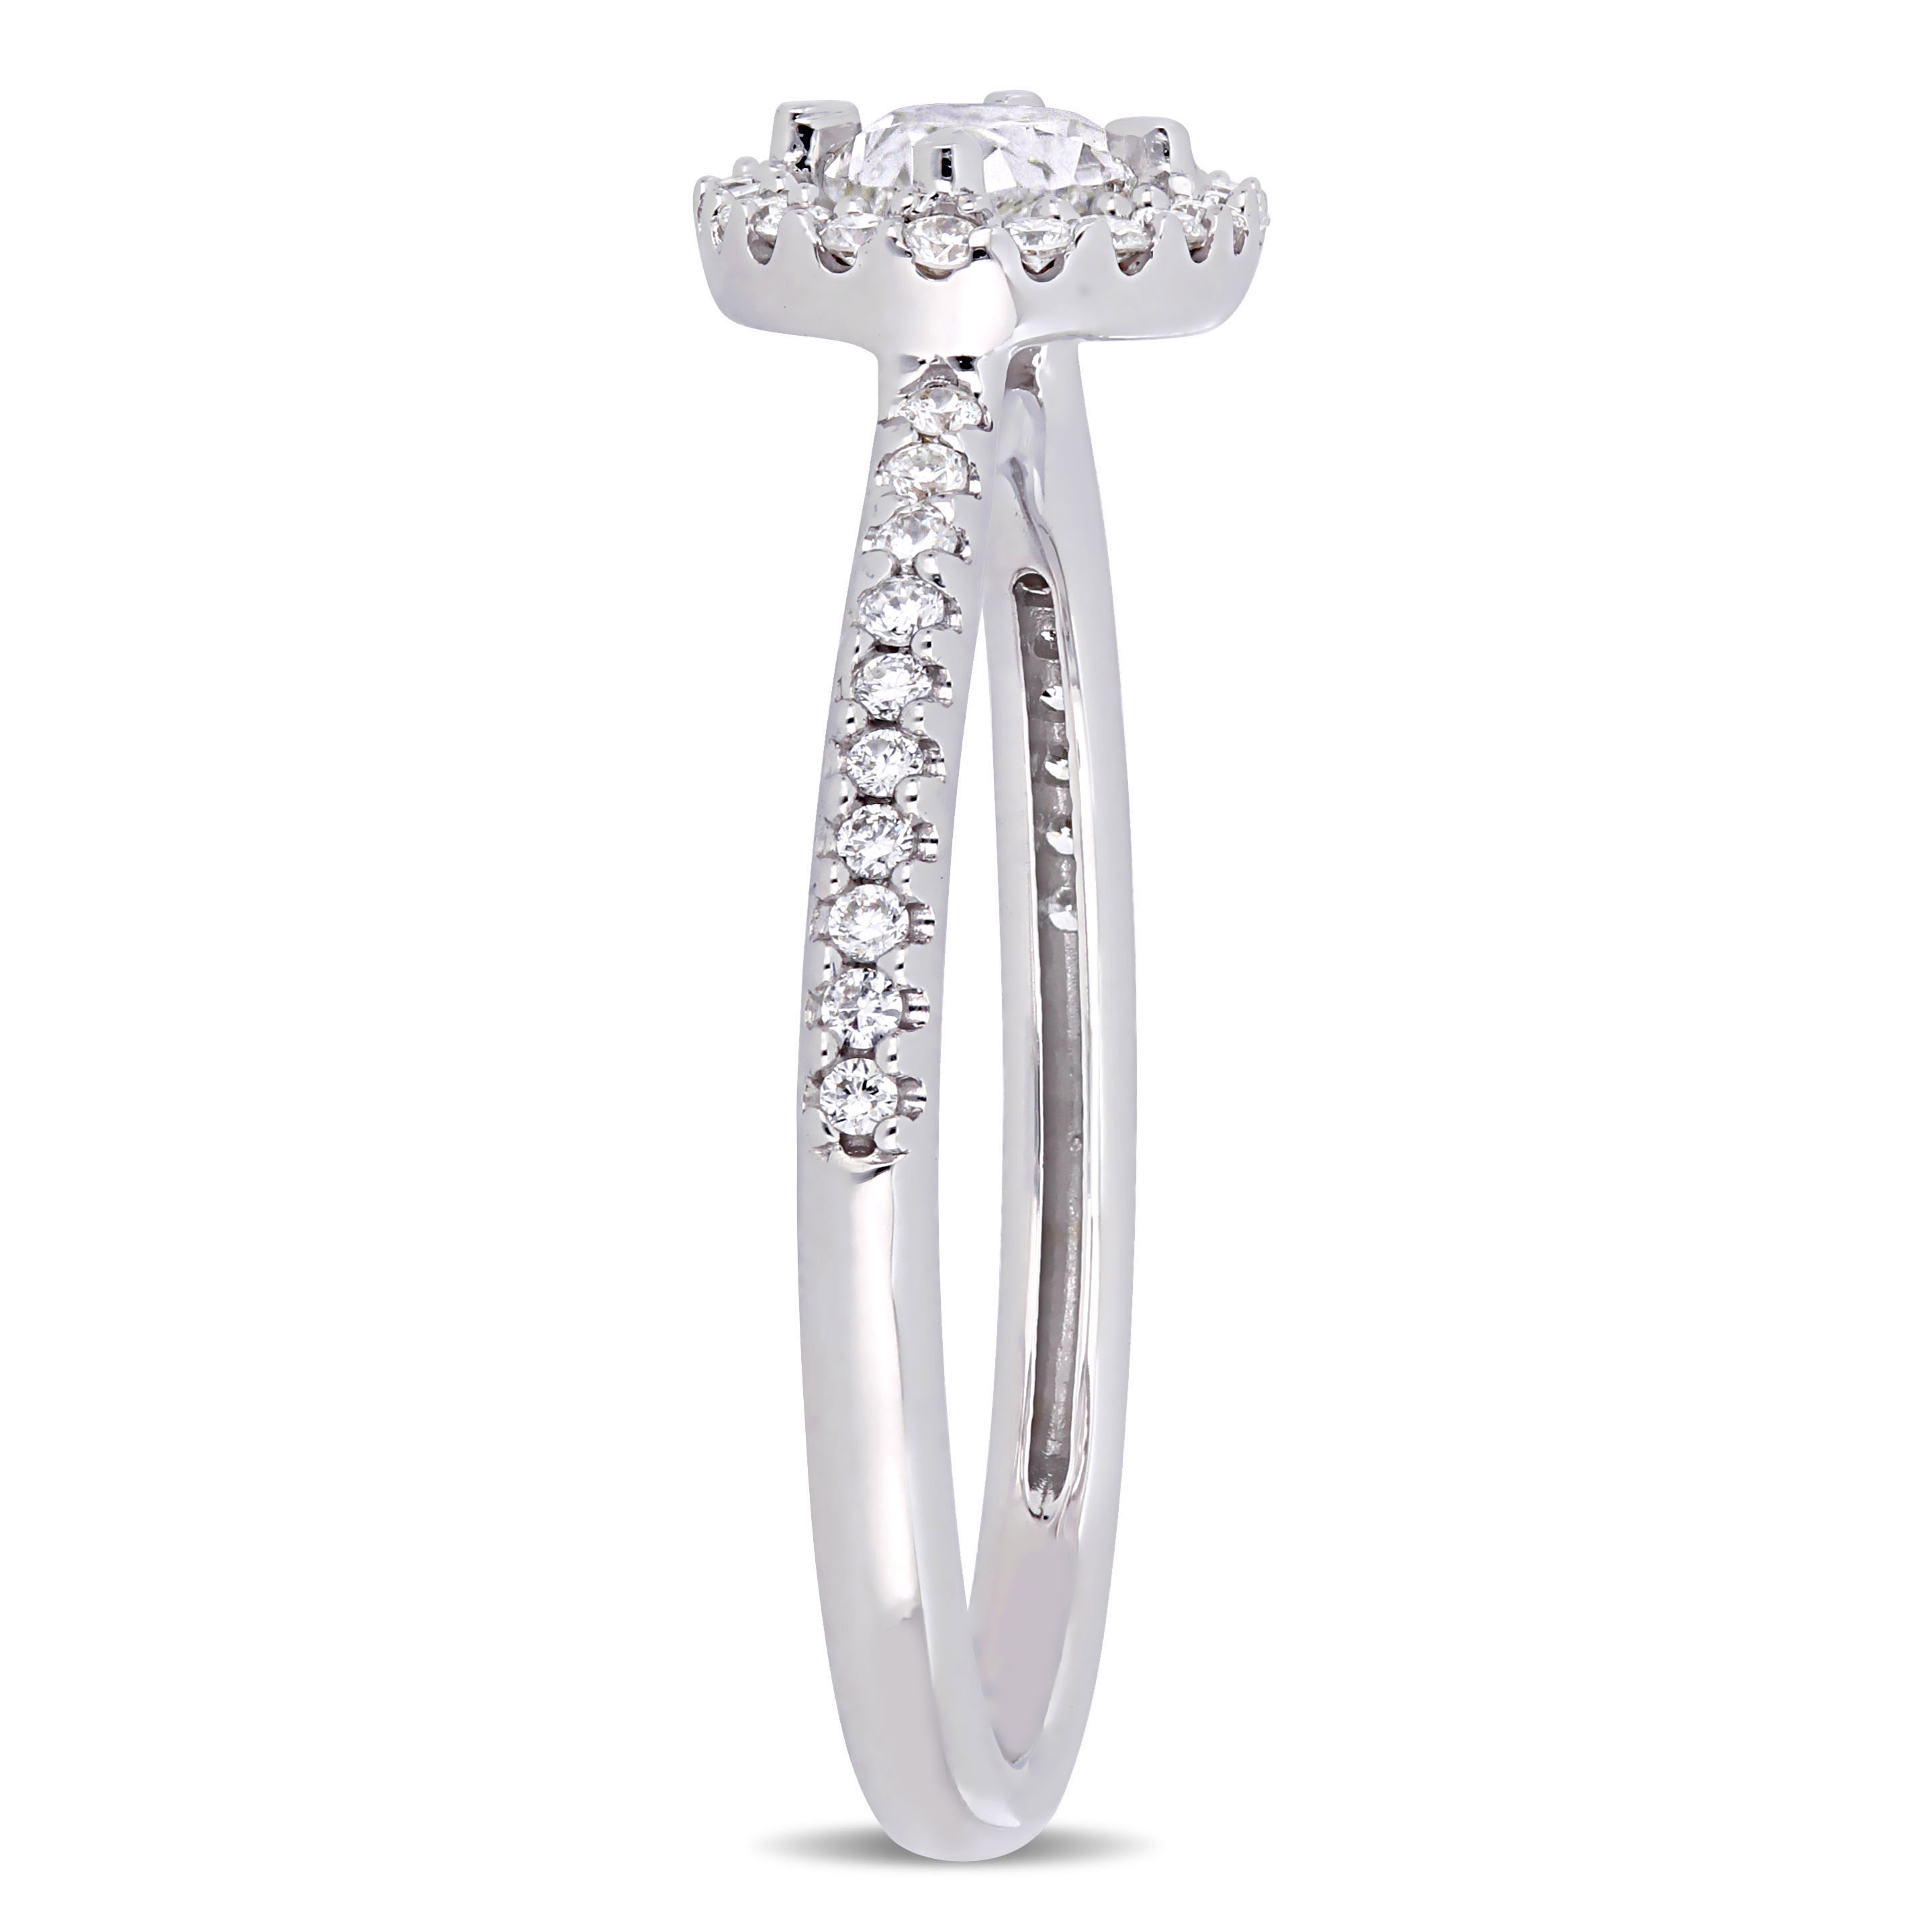 3/4 CT TW Oval-Cut Diamond Floating Halo Engagement Ring in 14k White Gold